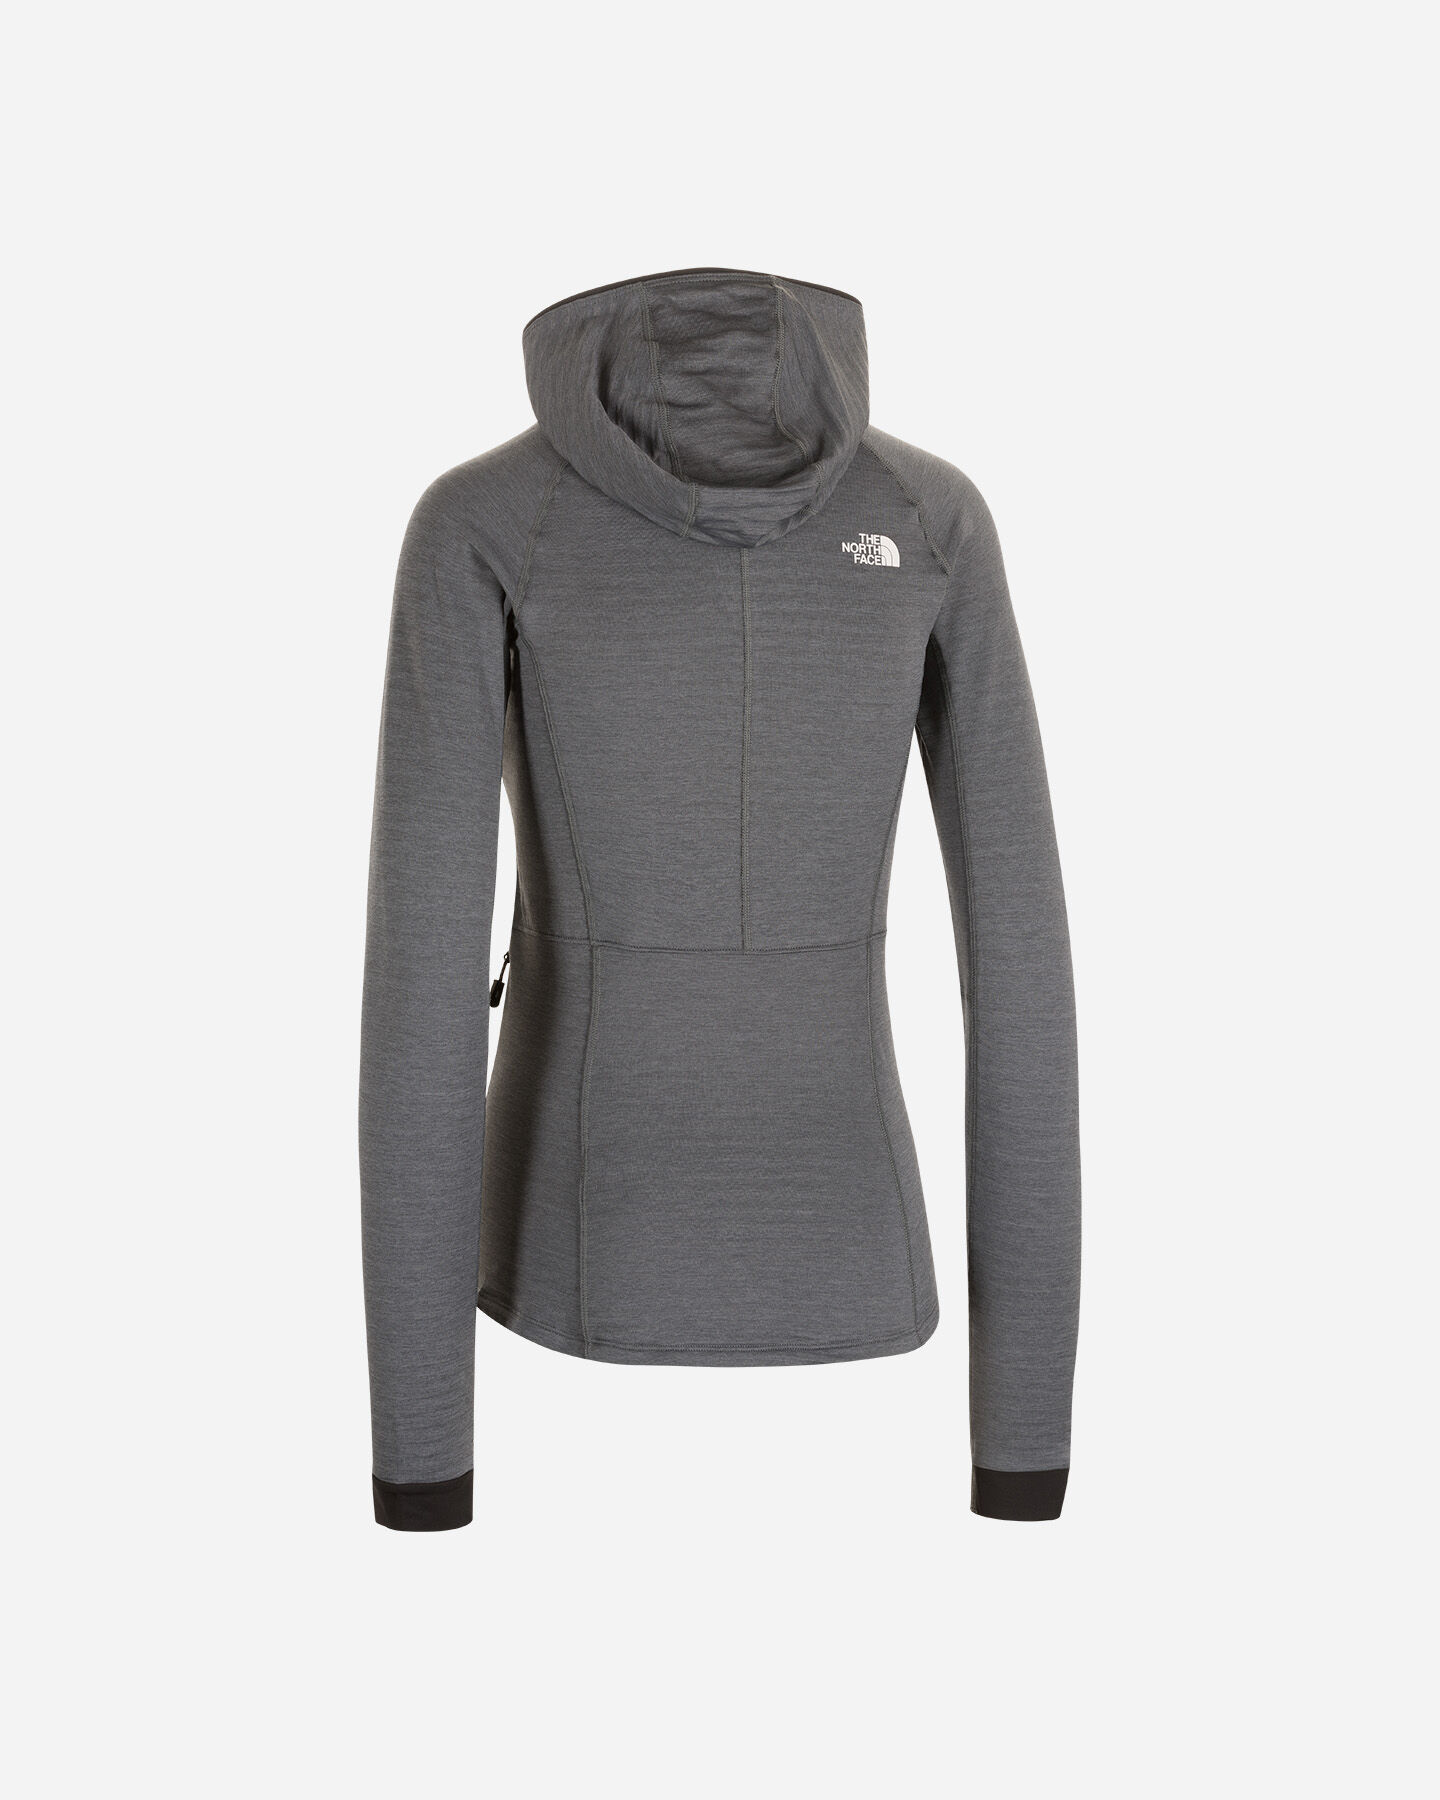  Pile THE NORTH FACE CIRCADIAN HD MIDLAYER W S5347925|J4E|XS scatto 1